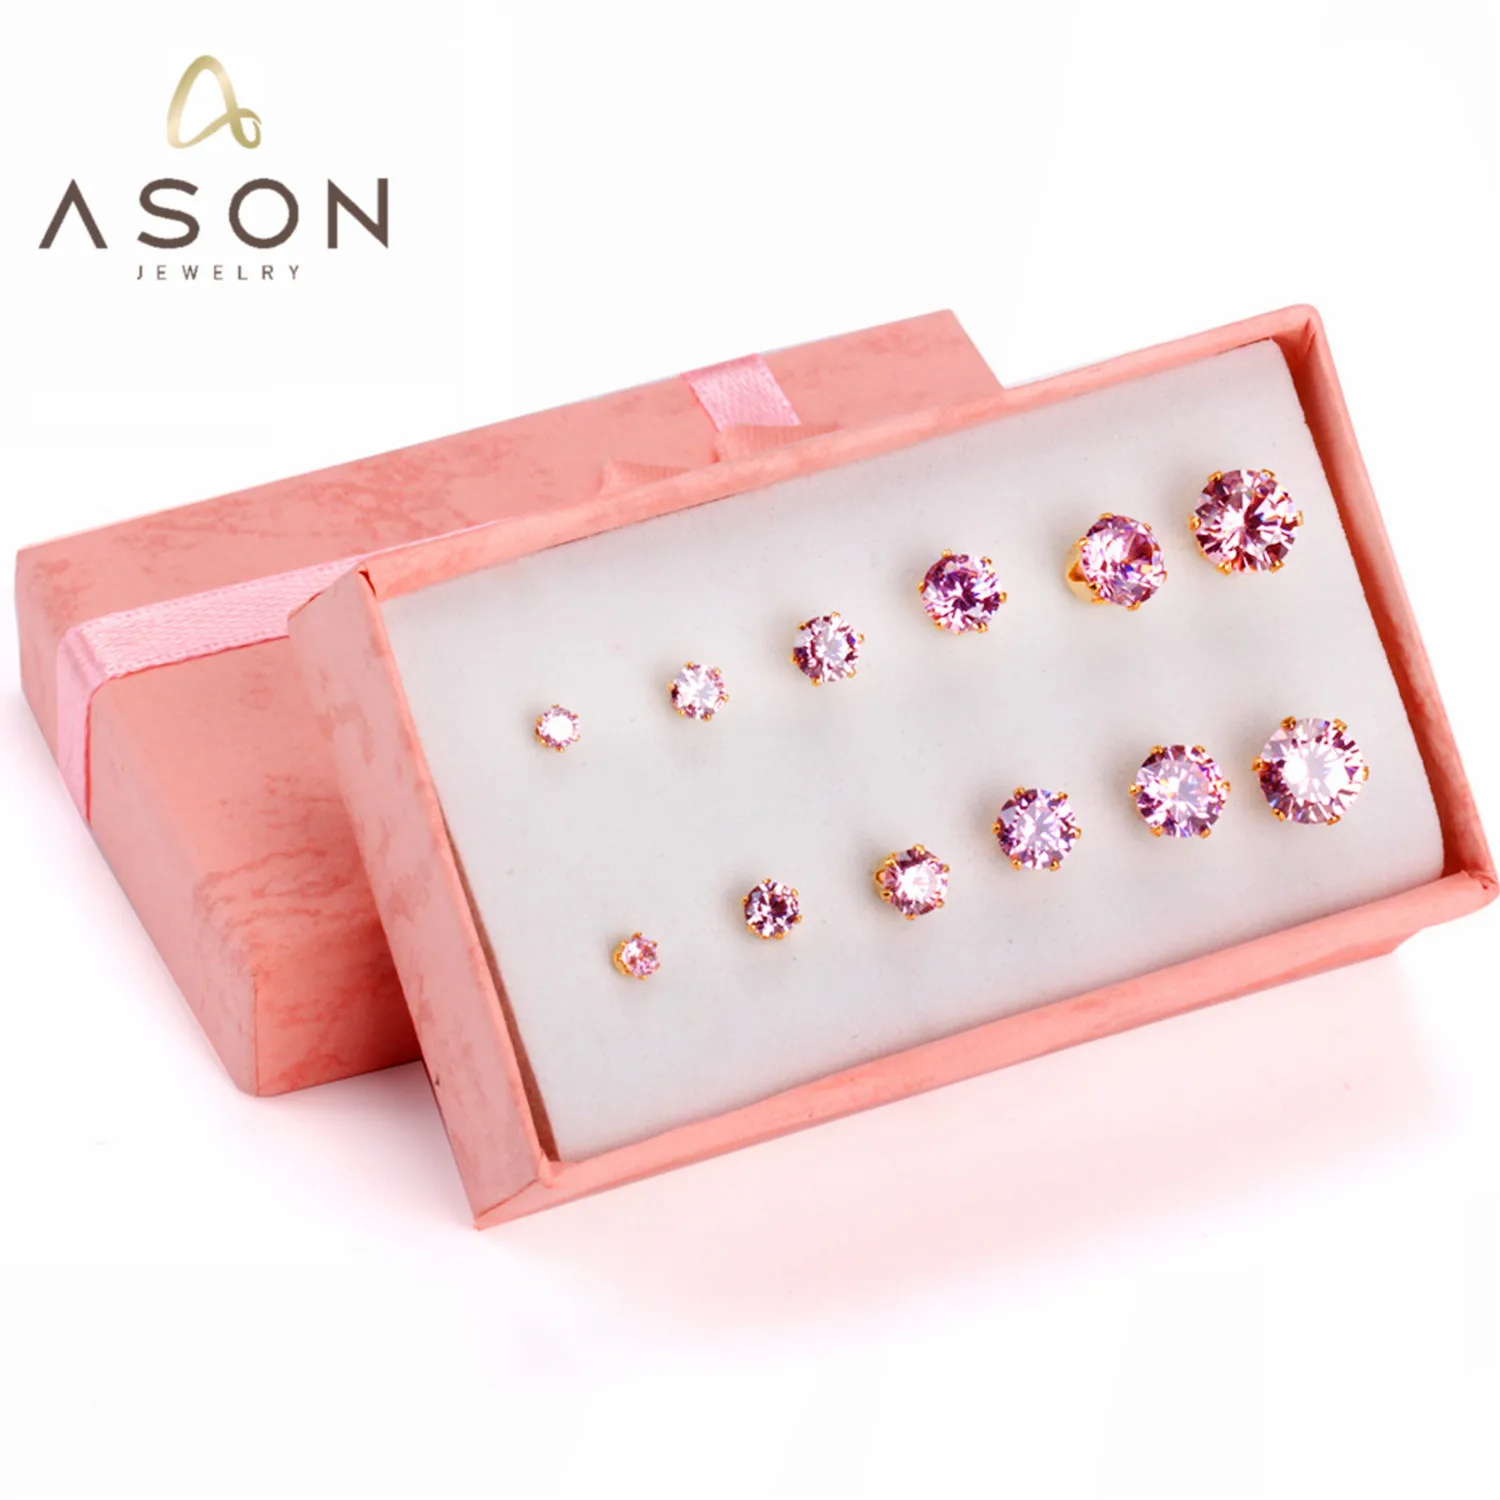 

ASONSTEEL 6pairs/Box Round Pink Cubic Zirconia Stud Earrings Sets Gold Color Surgical Stainless Steel For Women Fashion Jewelry